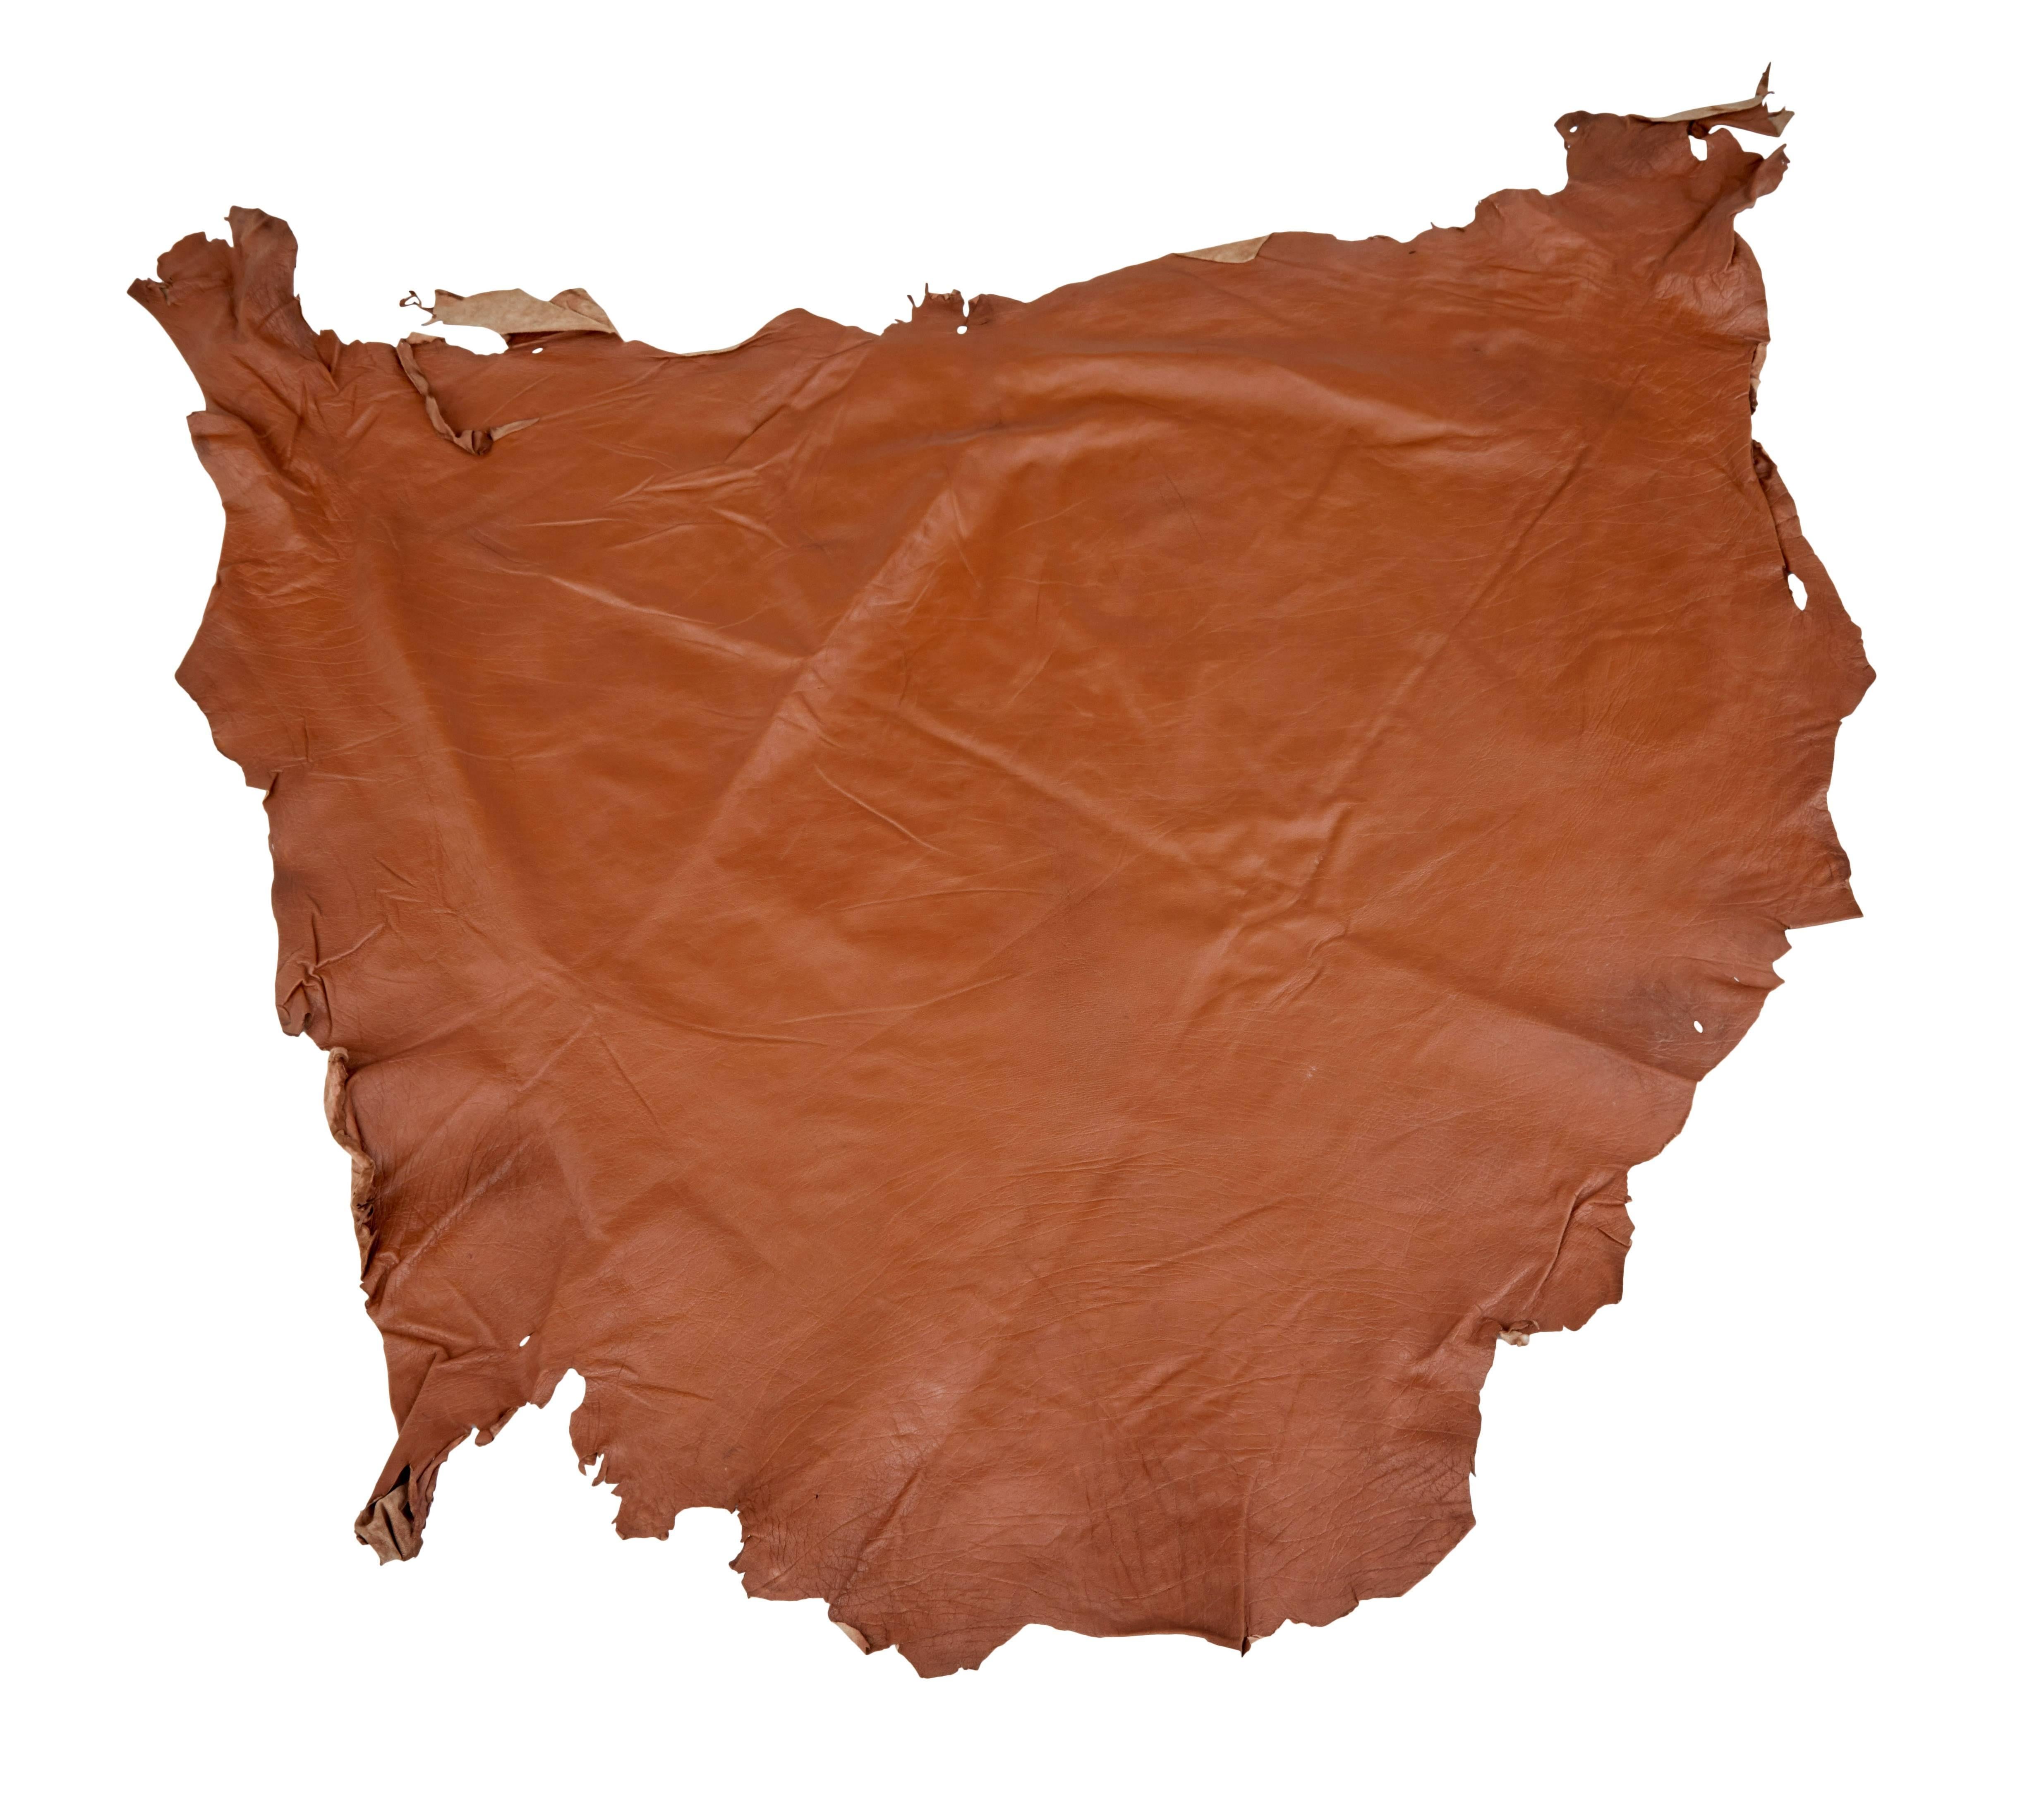 Contemporary Collection of Ten Tan Cow Leather Hides for Upholstery